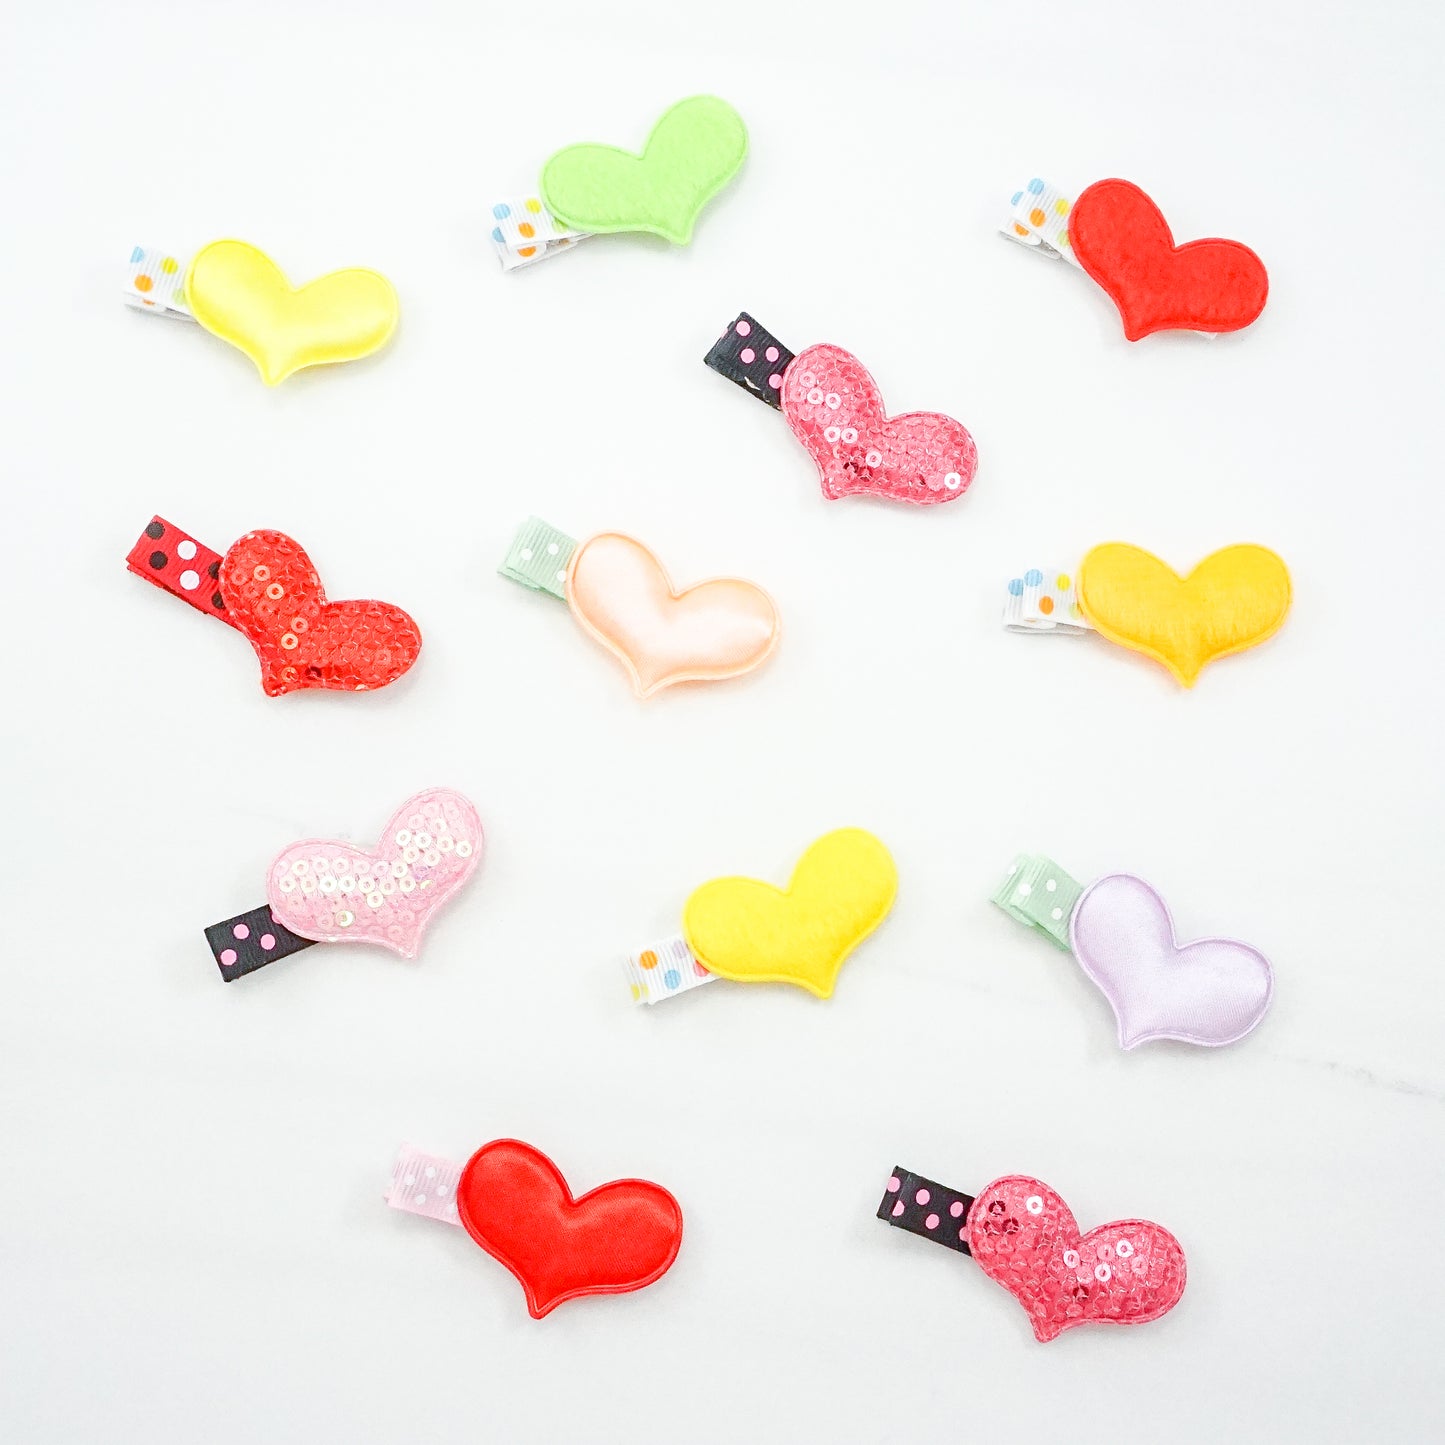 Heart Alligator Clips - Pack of 4, picked at random